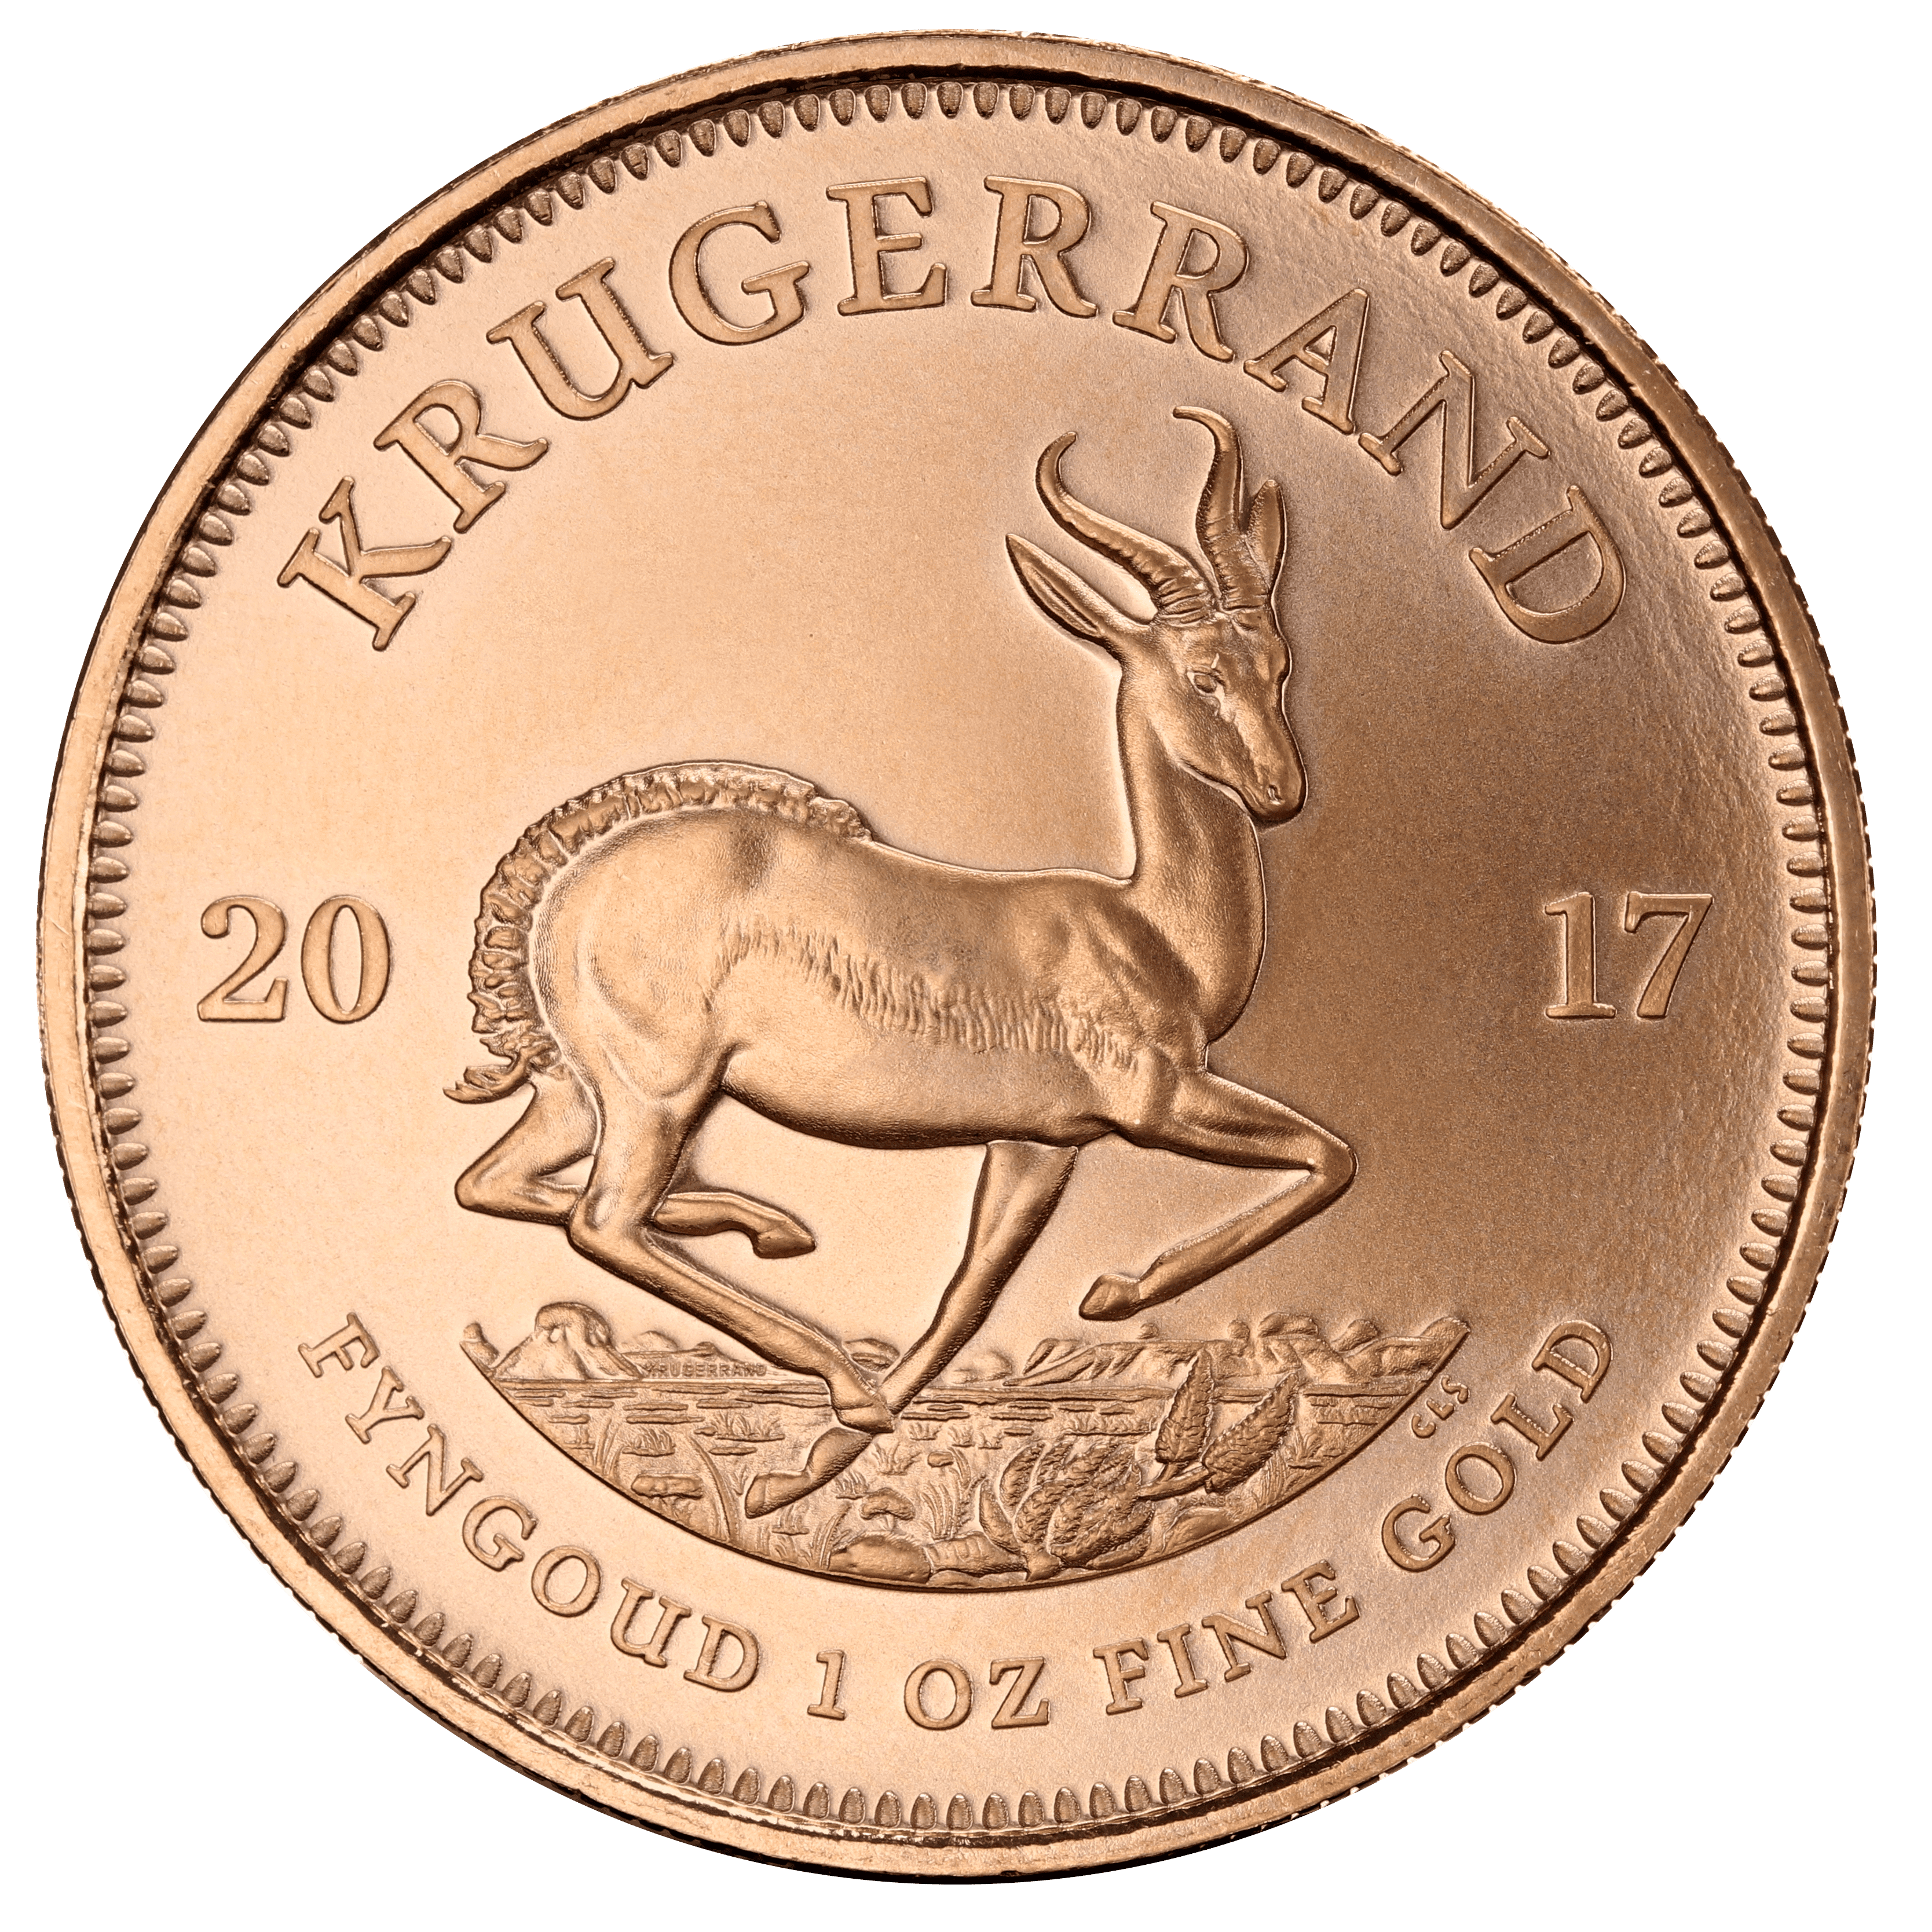 South African Mint Gold